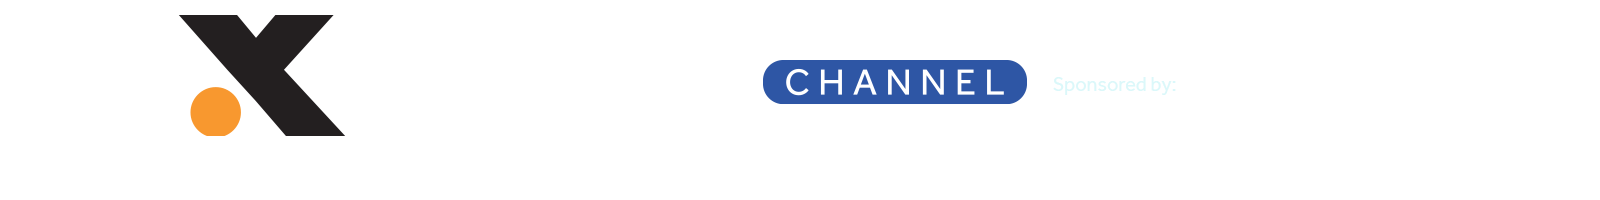 Dual Impact Channel - ETF Trends